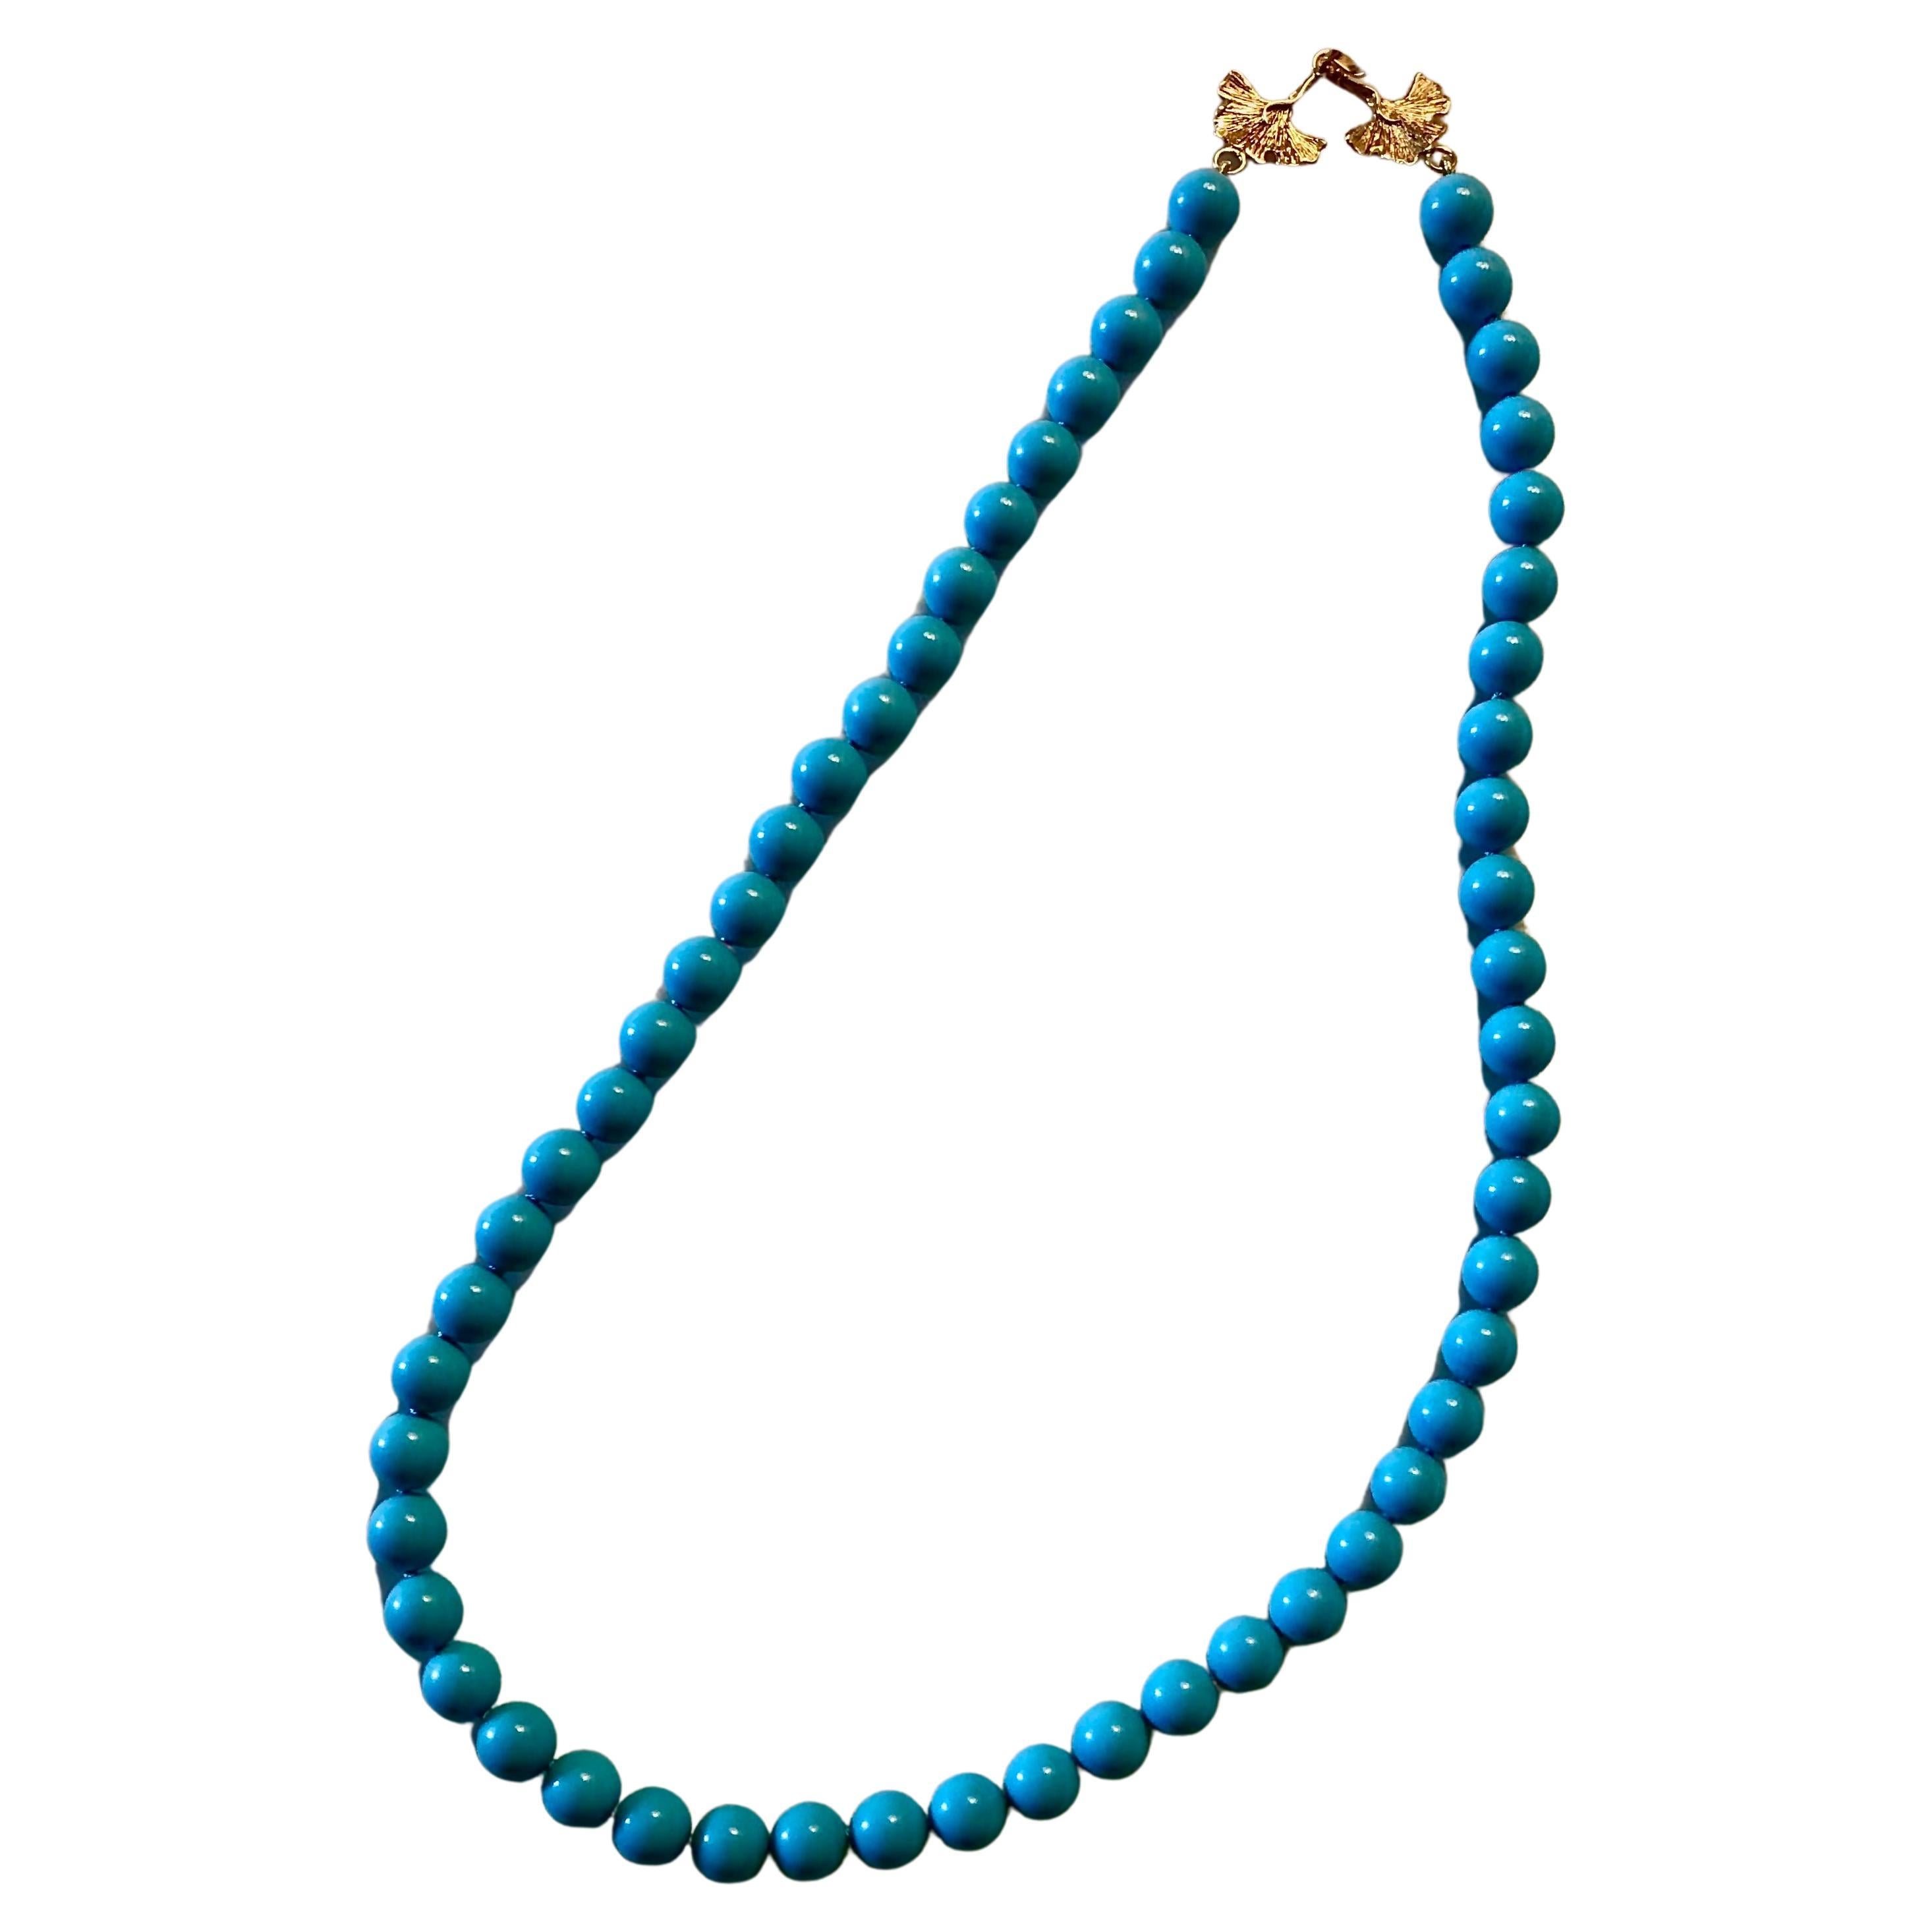 Sleeping beauty turquoise beads with 14kt gold clasp For Sale